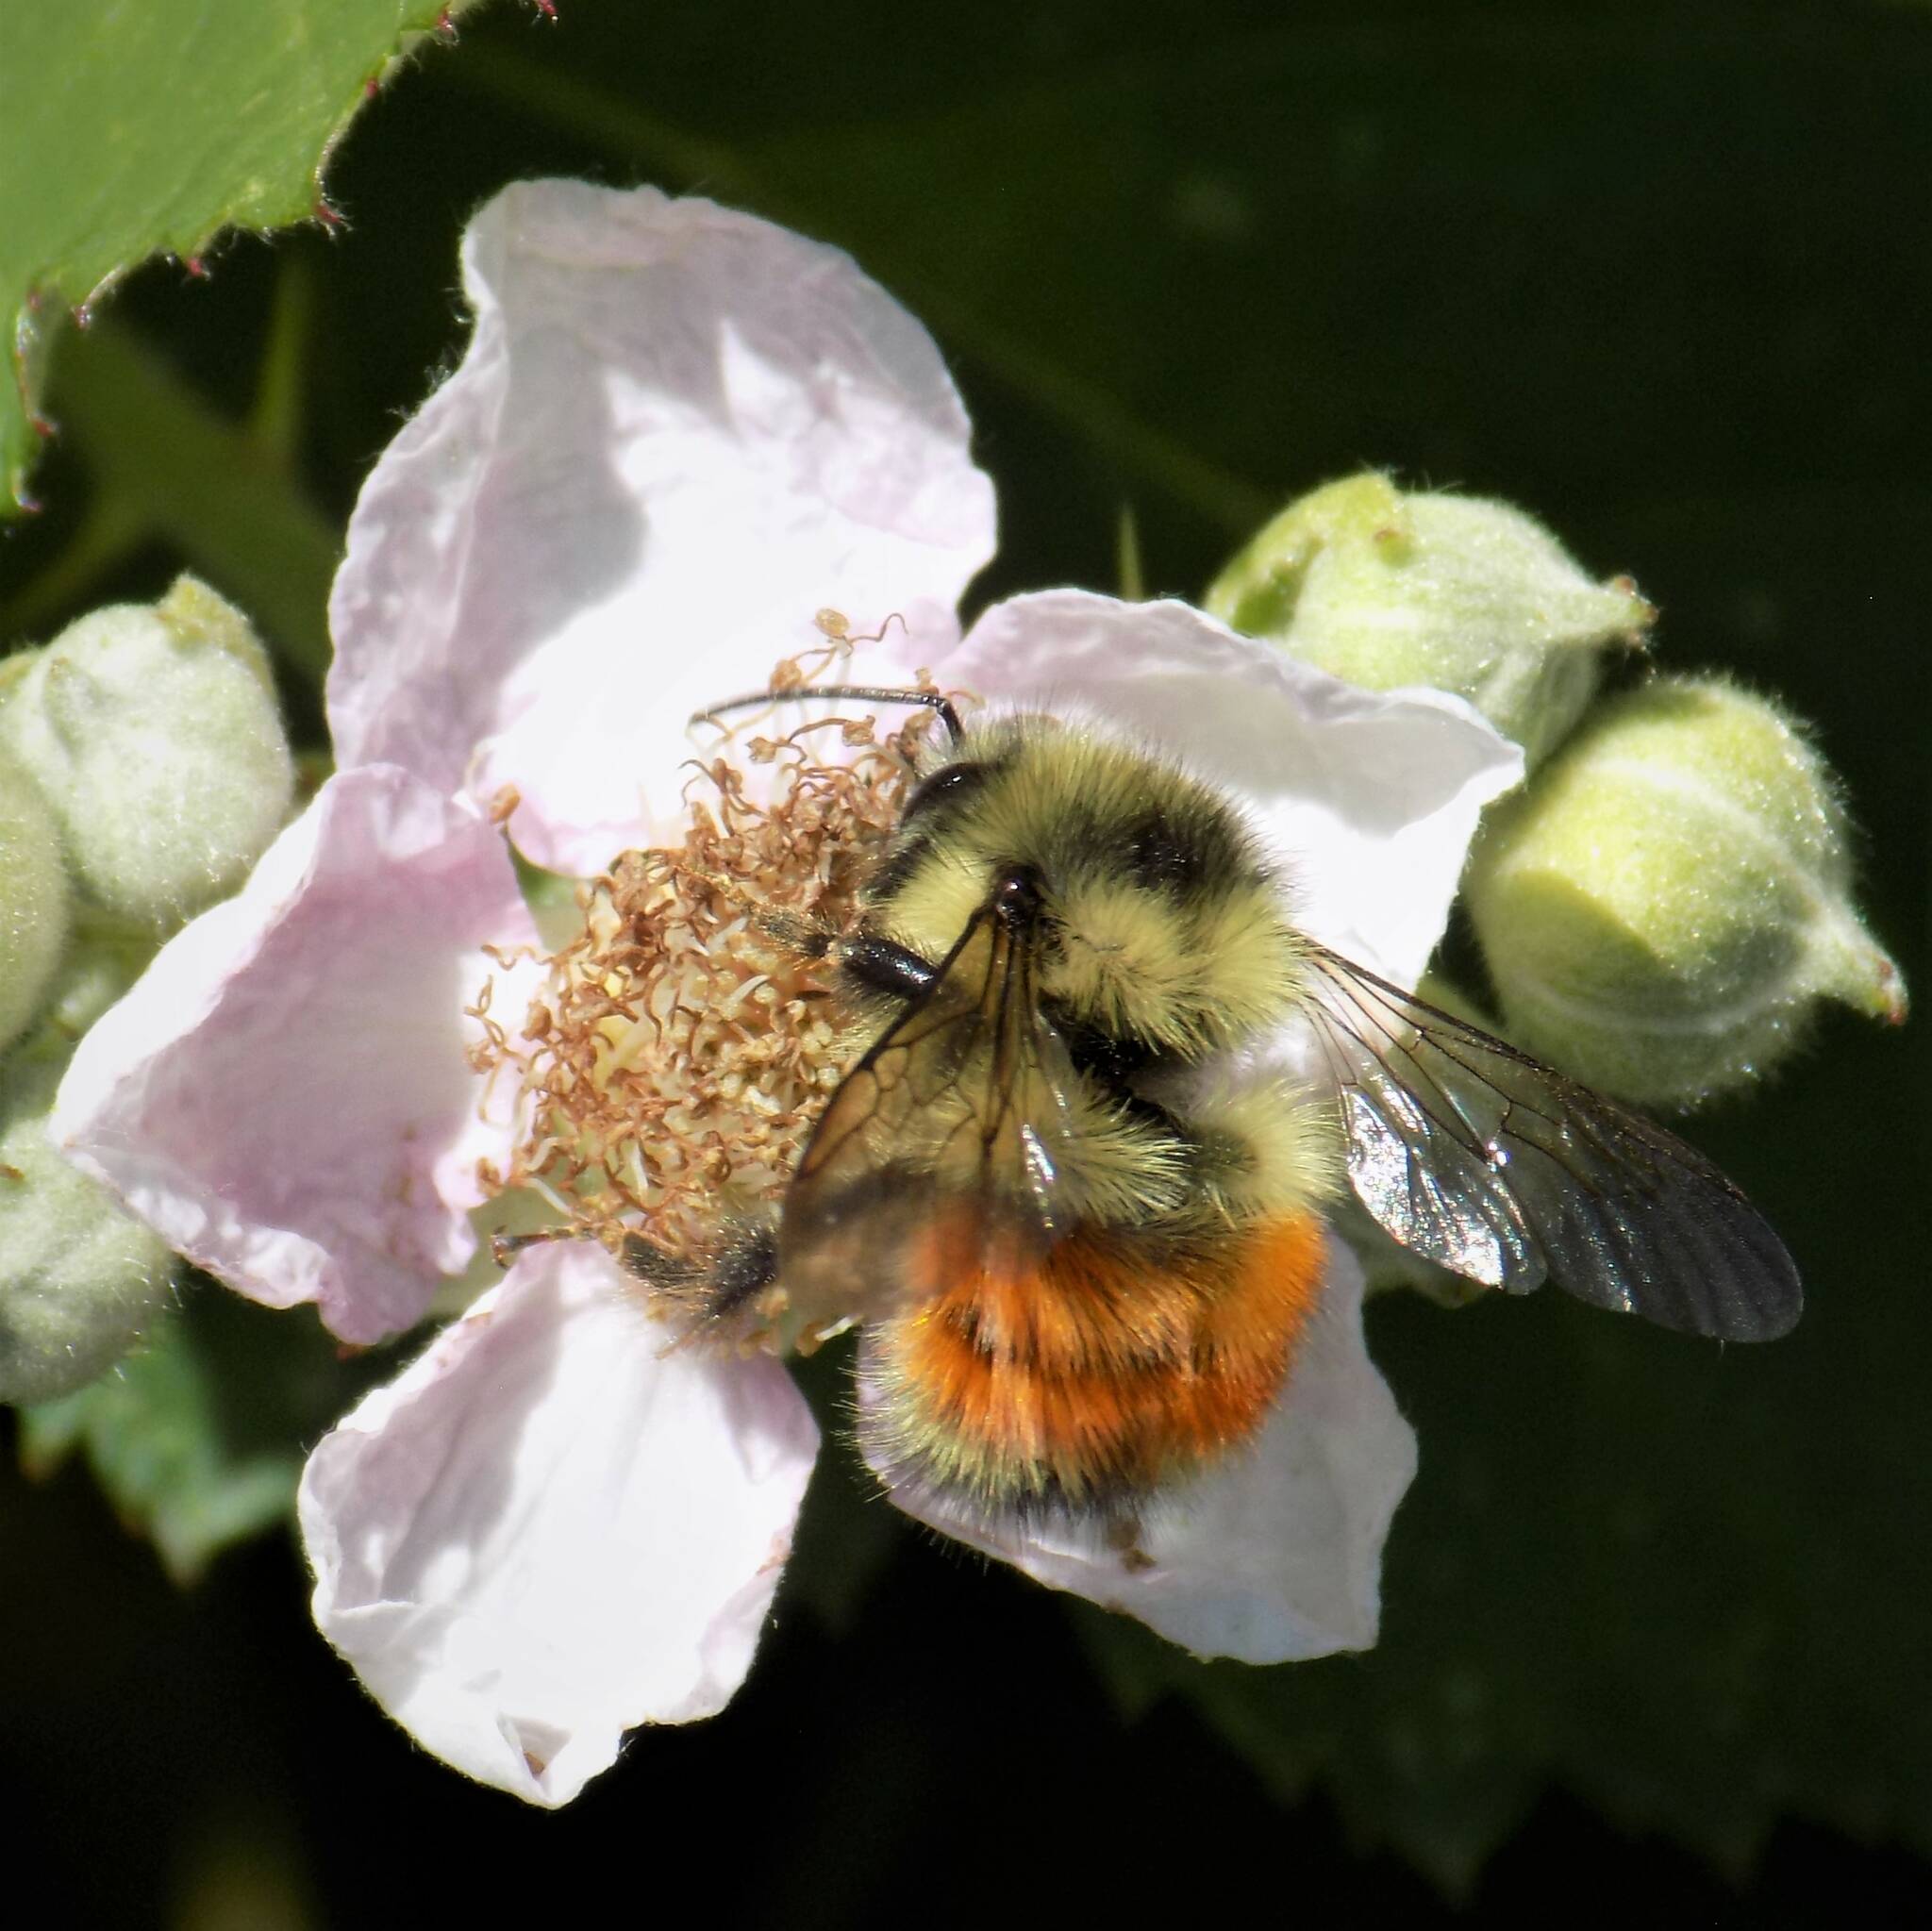 Contributed photo by Russel Barsh
A Black-Tailed Bumblebee queen enjoys an early blackberry bloom